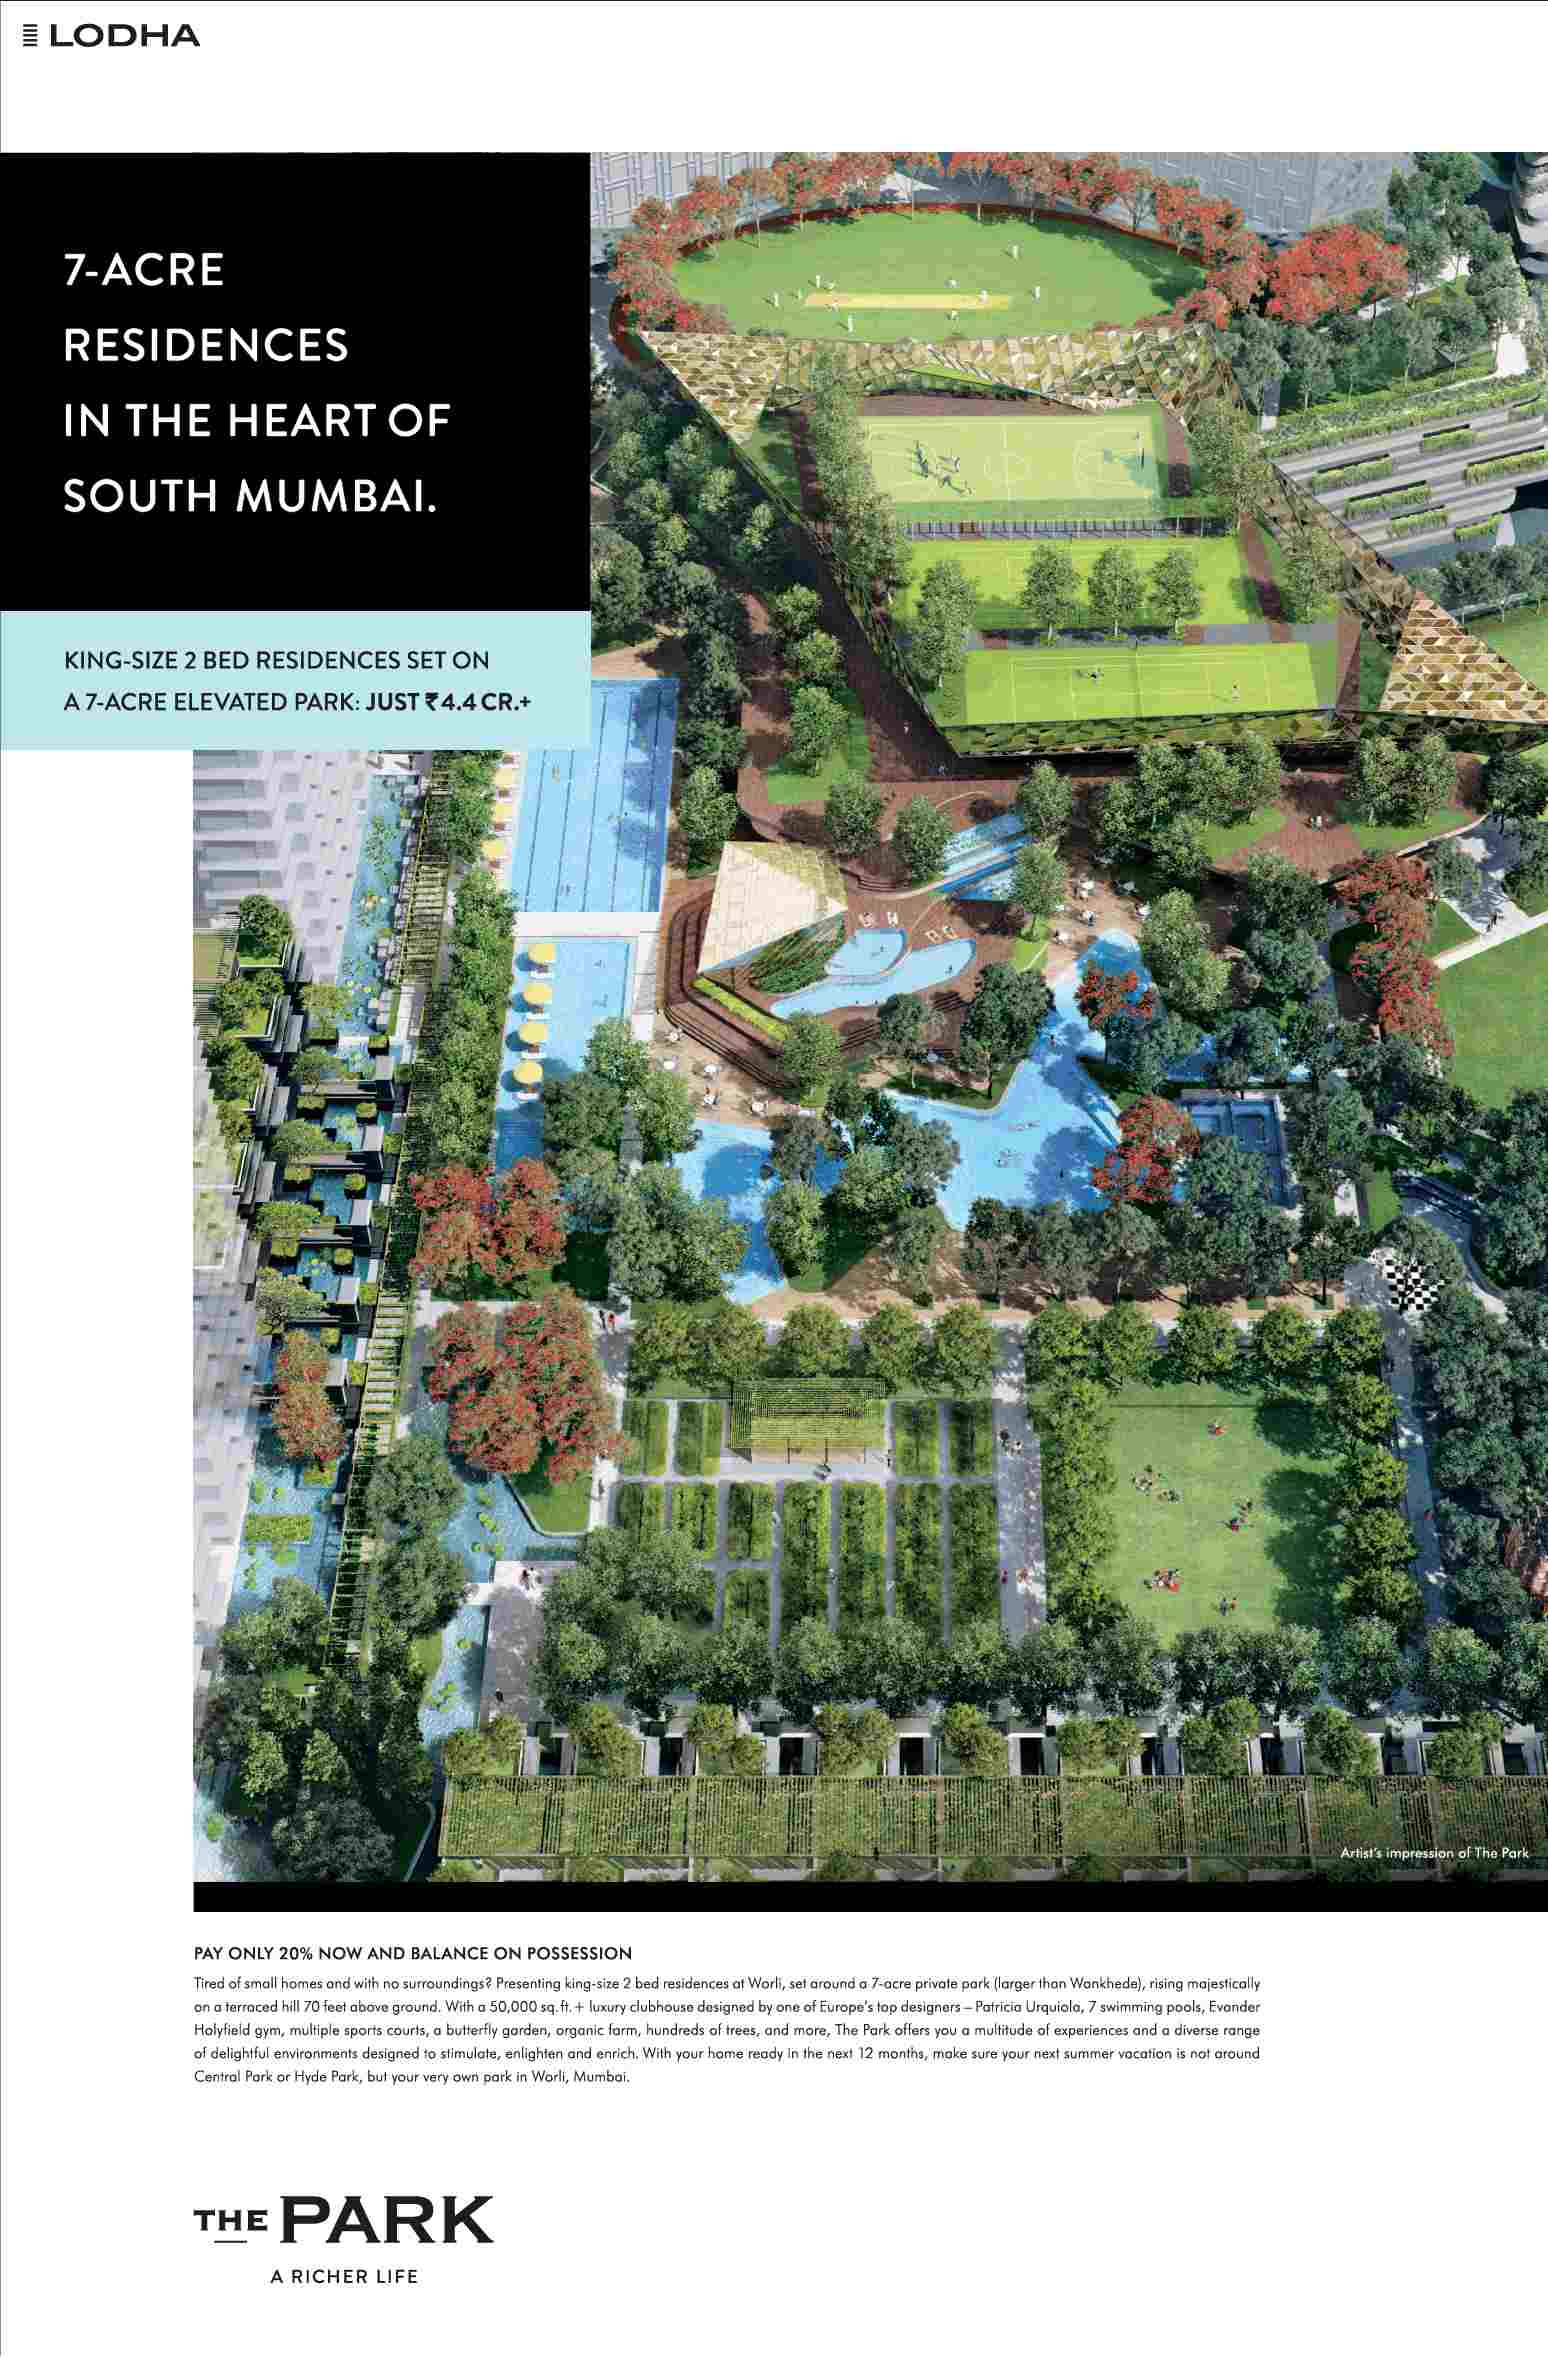 Pay only 20% now and balance on possession at Lodha The Park in Mumbai Update